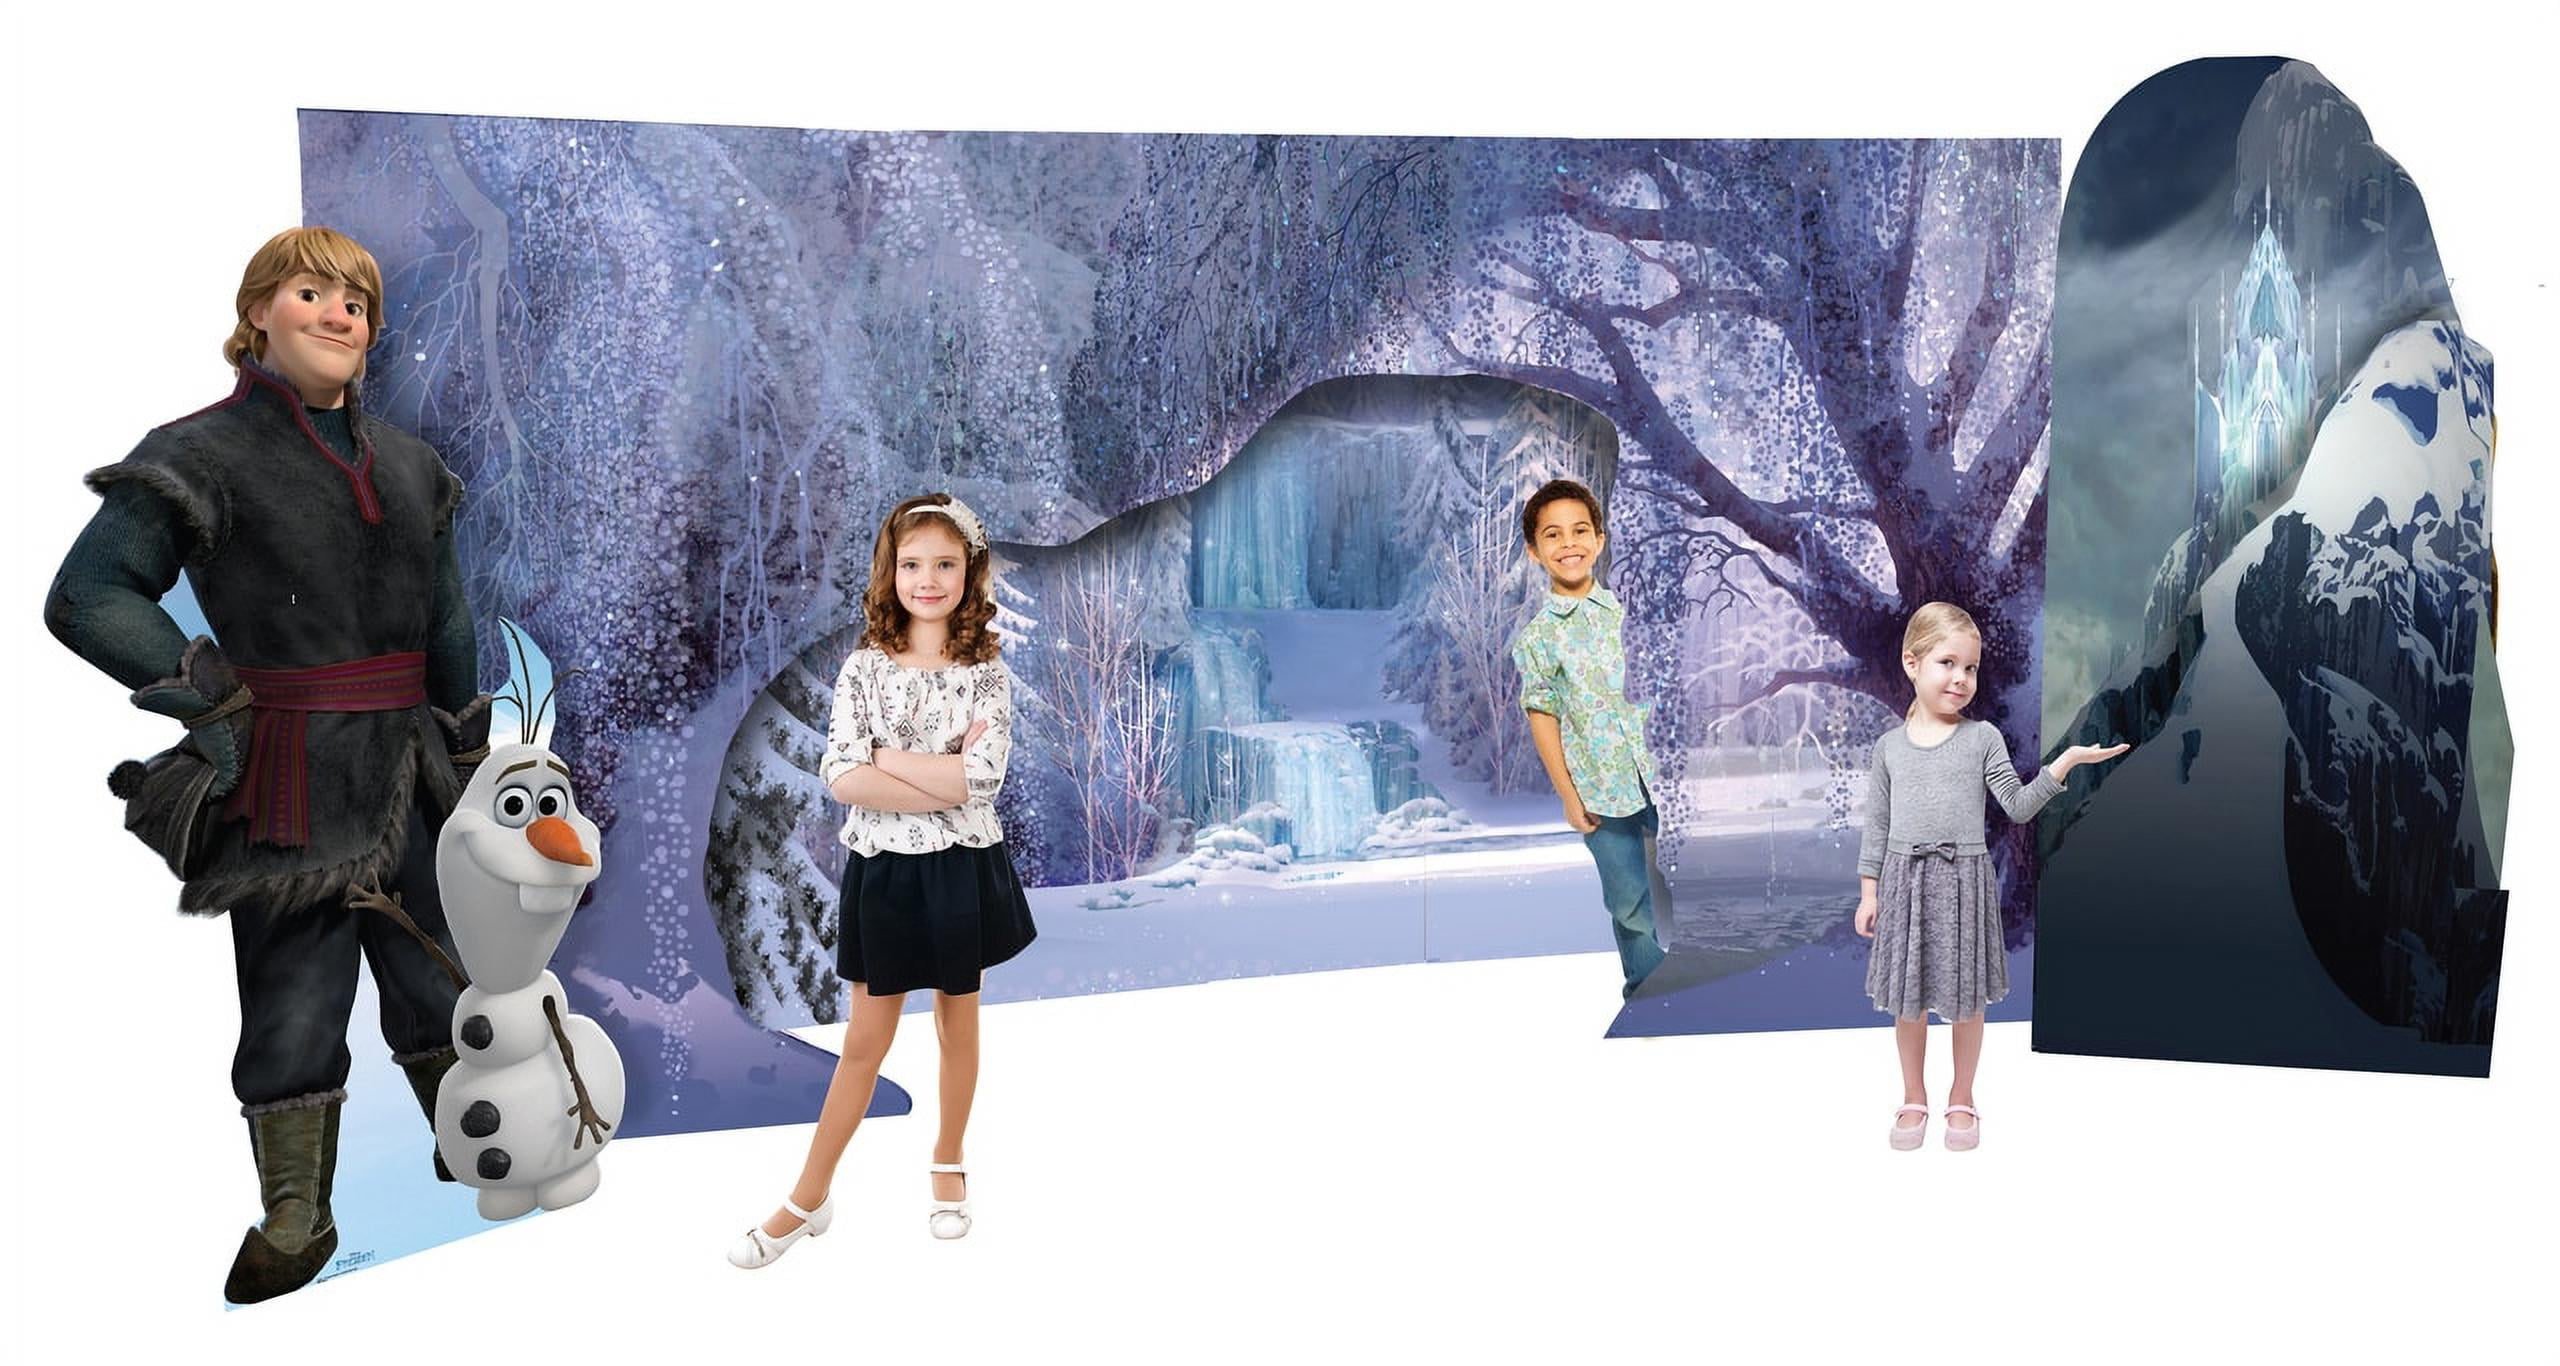 Picture of Advanced Graphics 2516 88 x 37 in. Frozen Scene Wall Decal